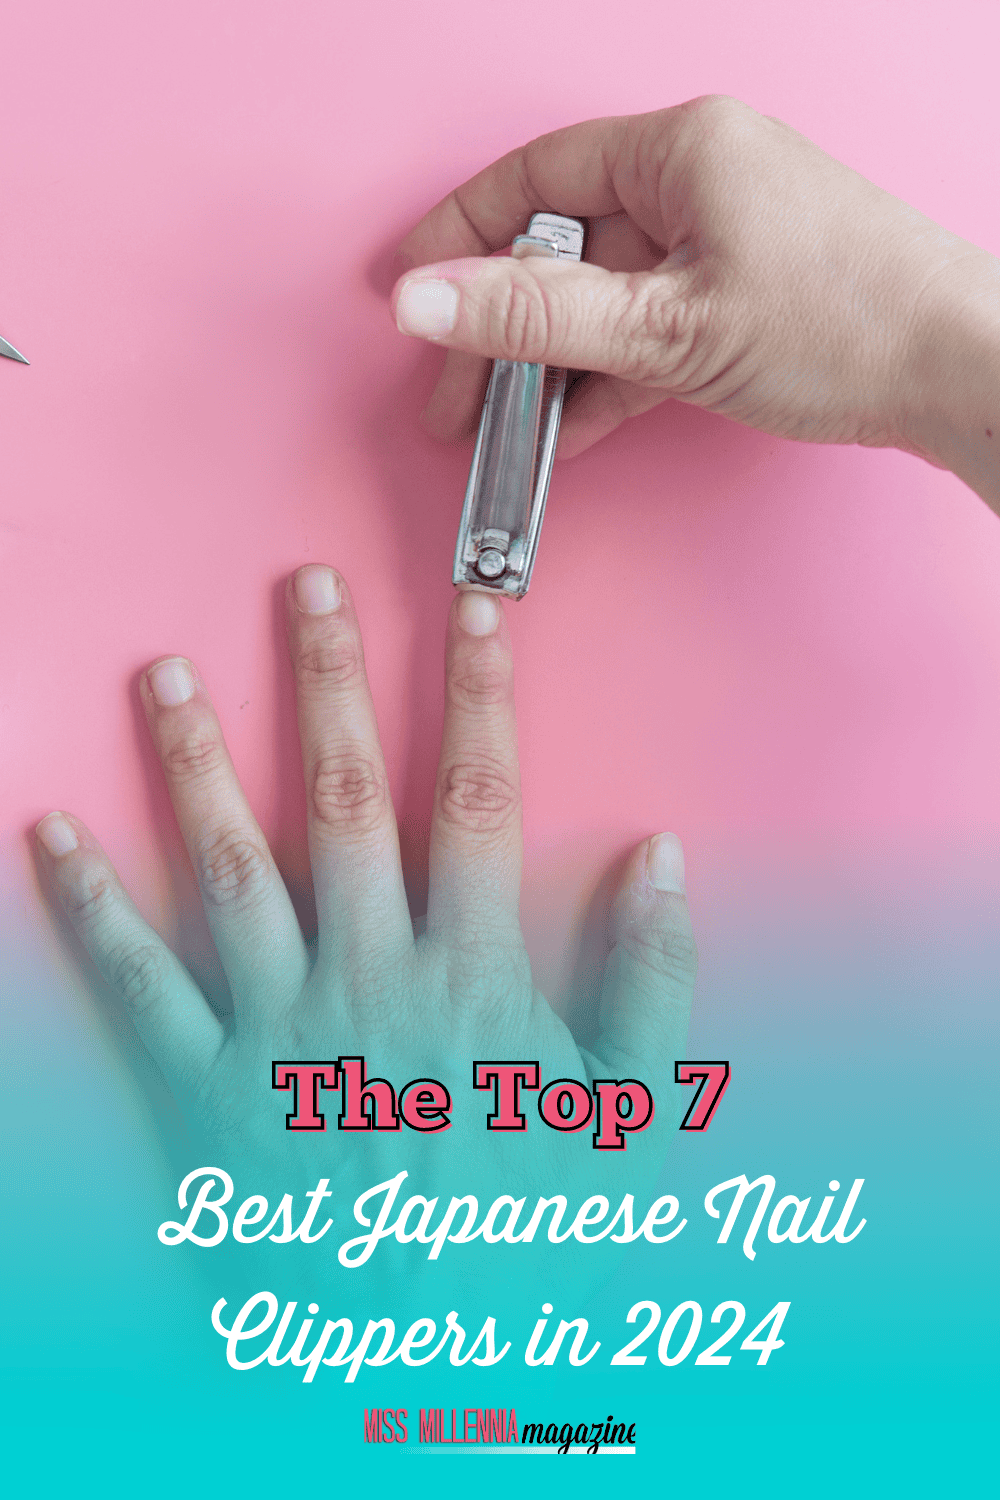 The Top 7 Best Japanese Nail Clippers in 2024